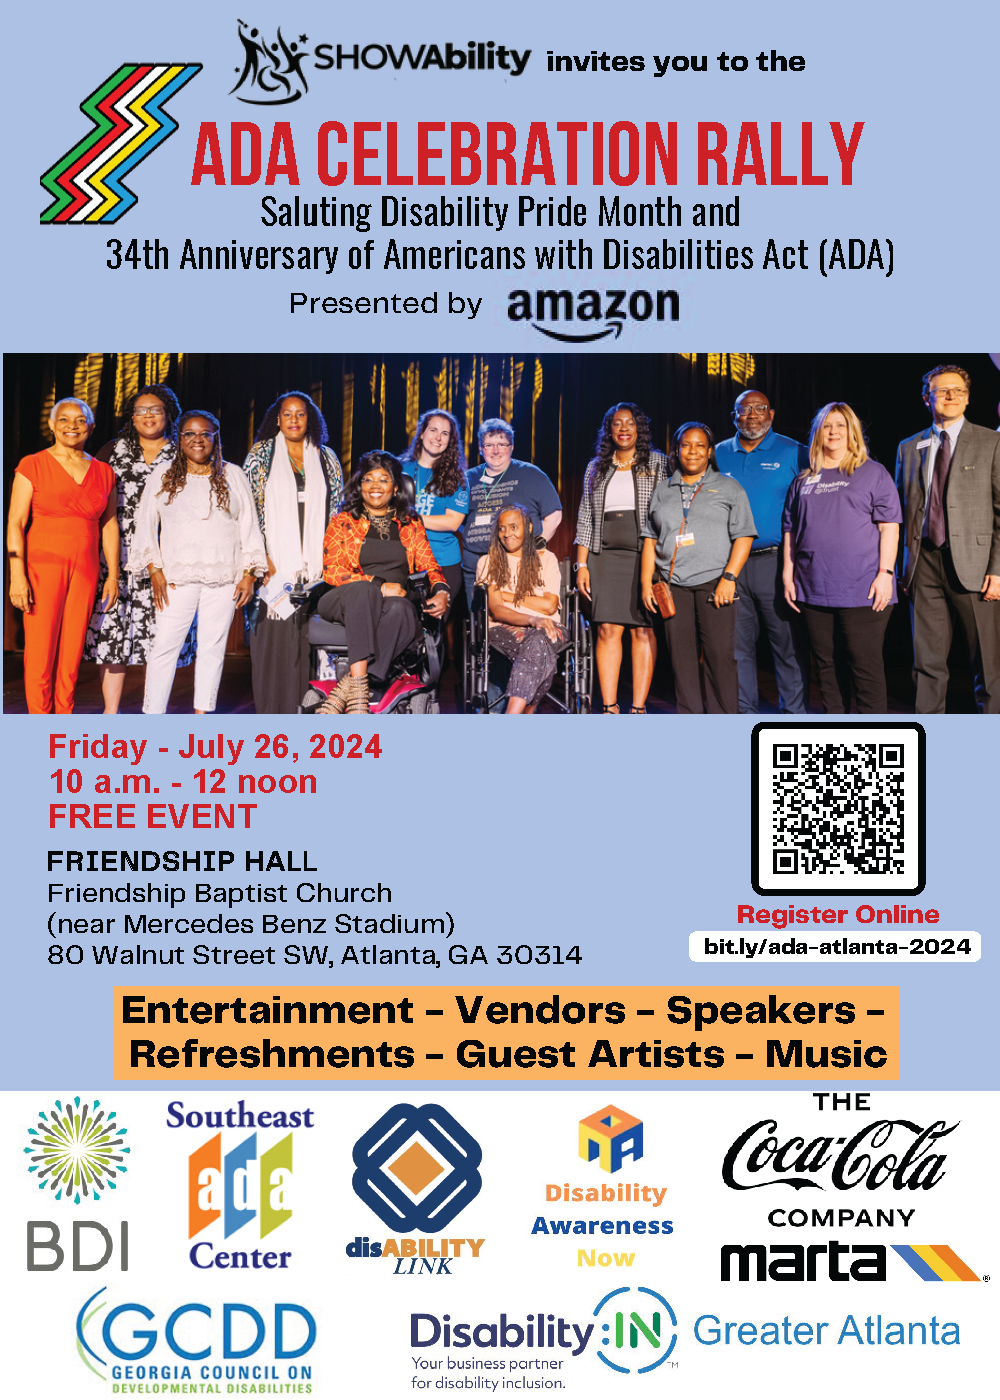 ADA Celebration Rally Saluting Disability Pride Month and the 34th Anniversary of the Americans with Disabilities Act (ADA) Presented by Amazon.  Friday - July 26th, 2024 10 a.m. - 12 noon FREE EVENT  Friendship Hall Friendship Baptist Church (near Mercedes Benz Stadium) 80 Walnut Street SW, Atlanta, GA 30314  Entertainment-Vendors-Speakers-Refreshments-Guest Artists-Music  BDI, Southeast ADA Center, Disability Link, Disability Awareness Now, The Coca-Cola Company, MARTA Greater Atlanta, GCDD GA Council.